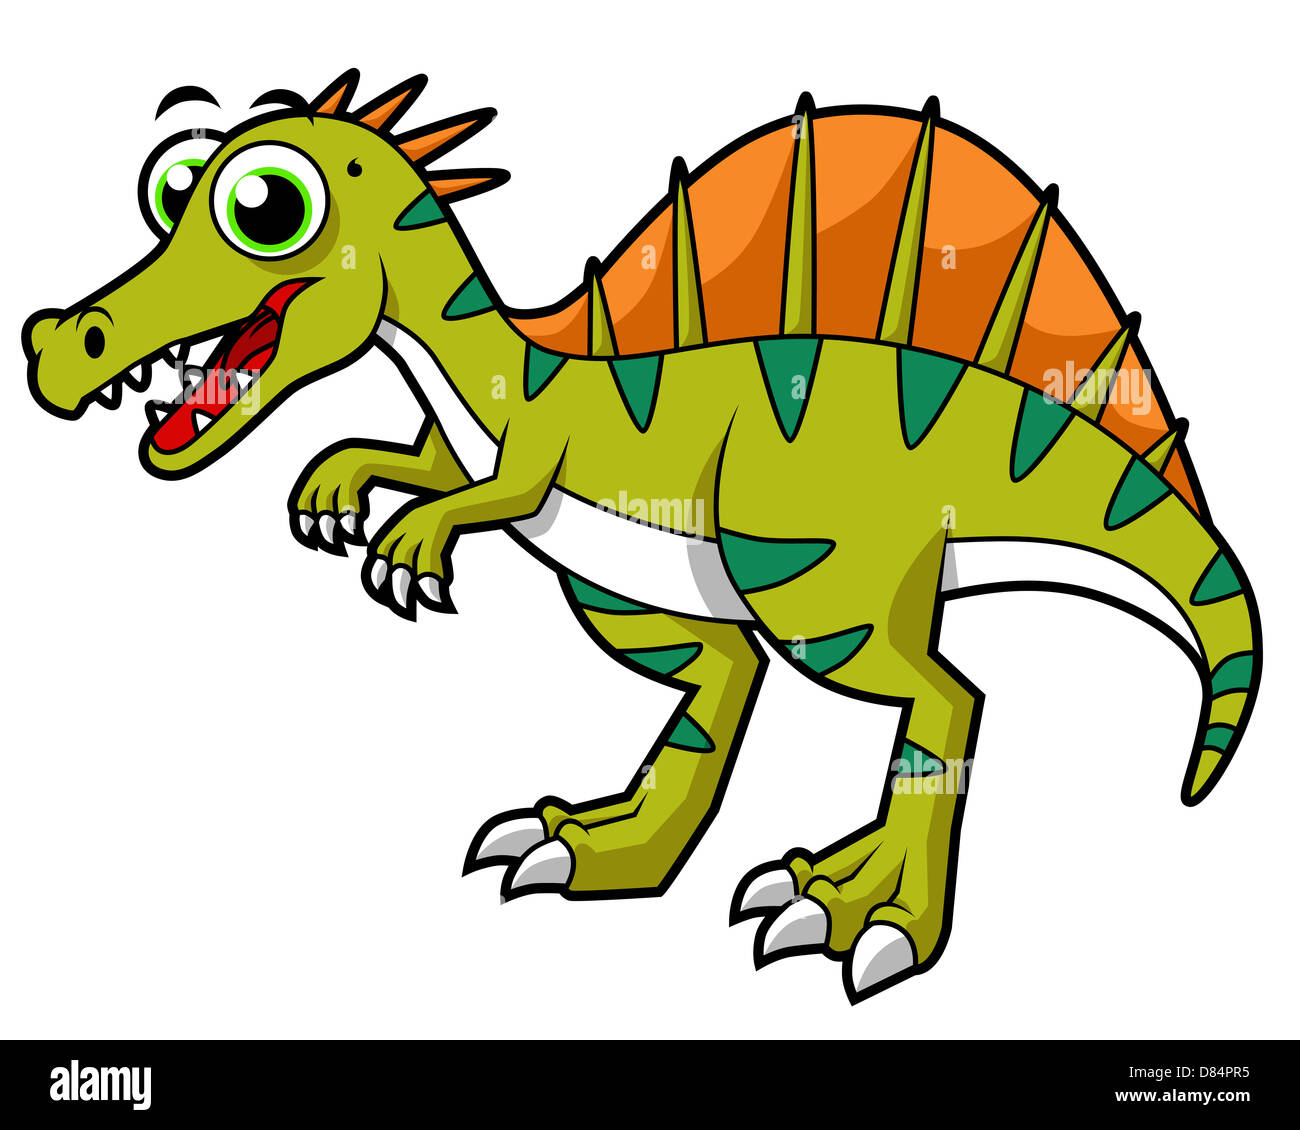 Cute illustration of a smiling Spinosaurus. Stock Photo